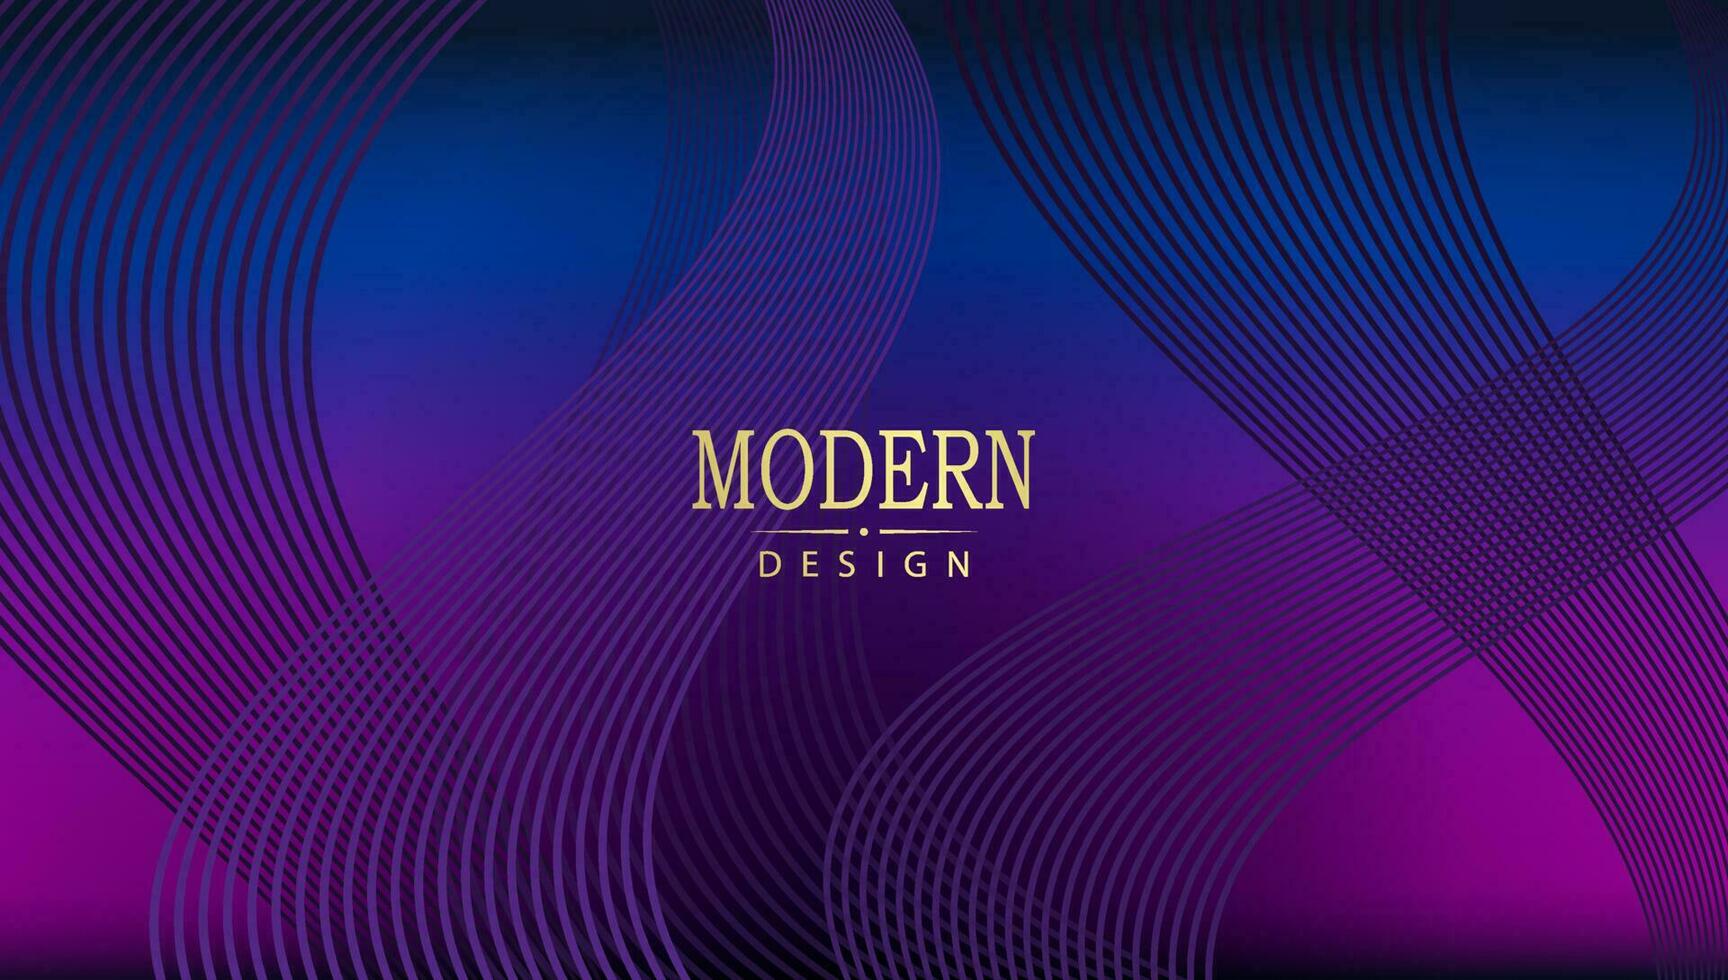 Curvy thin lines on a blue and purple gradient background. vector